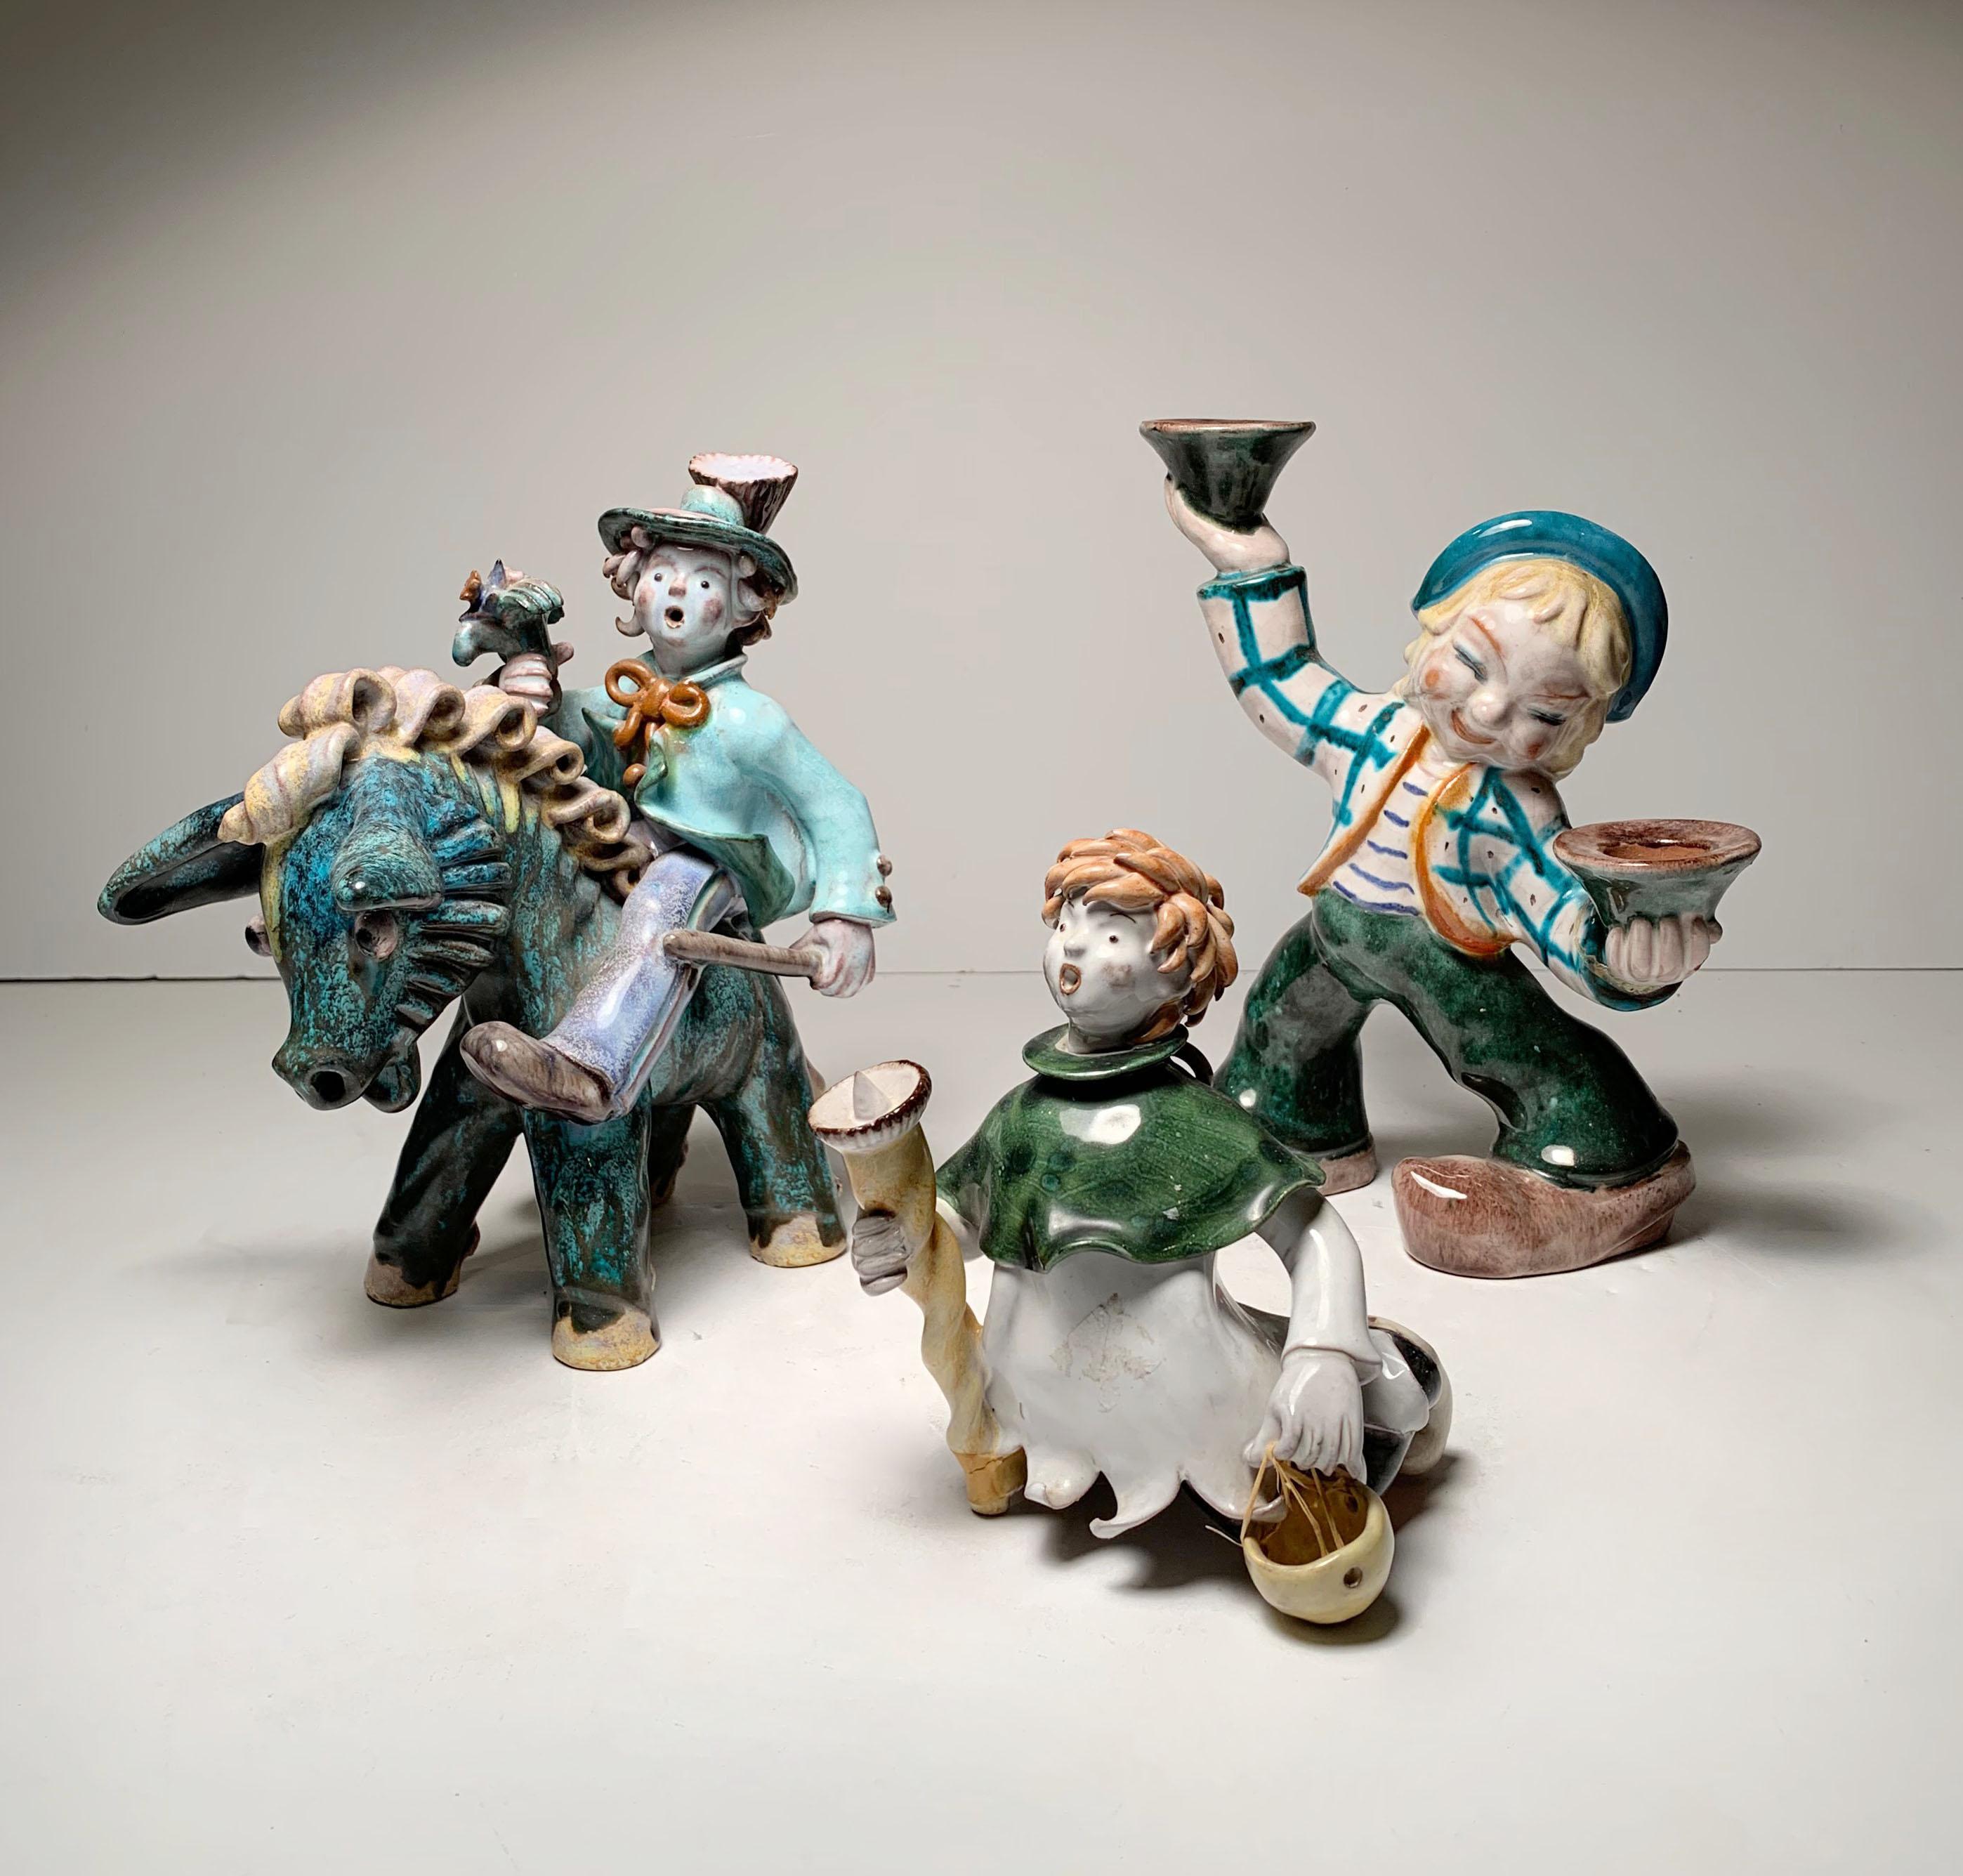 A group of 3 Austrian ceramic figures attributed to Leopold Anzengruber.

Manner of Walter Bosse and the Wiener Werkstatte

Dimension is of dancing large figure.

Note: They are all in as-is condition with damage. The little man has breaks on his